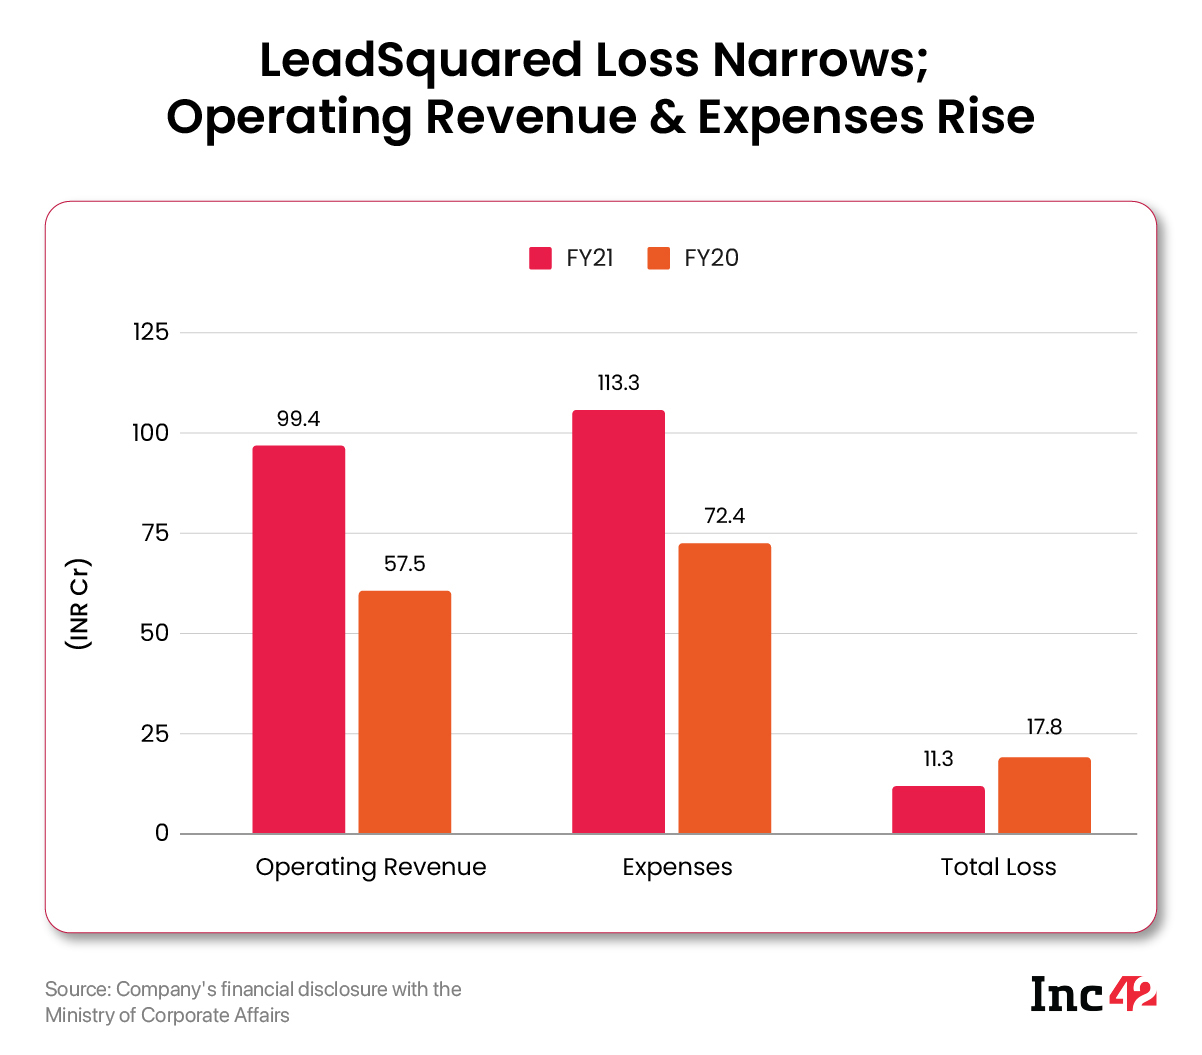 LeadSquared FY21 Loss Declines 37% To INR 11 Cr, Operating Revenue Up To INR 99 Cr